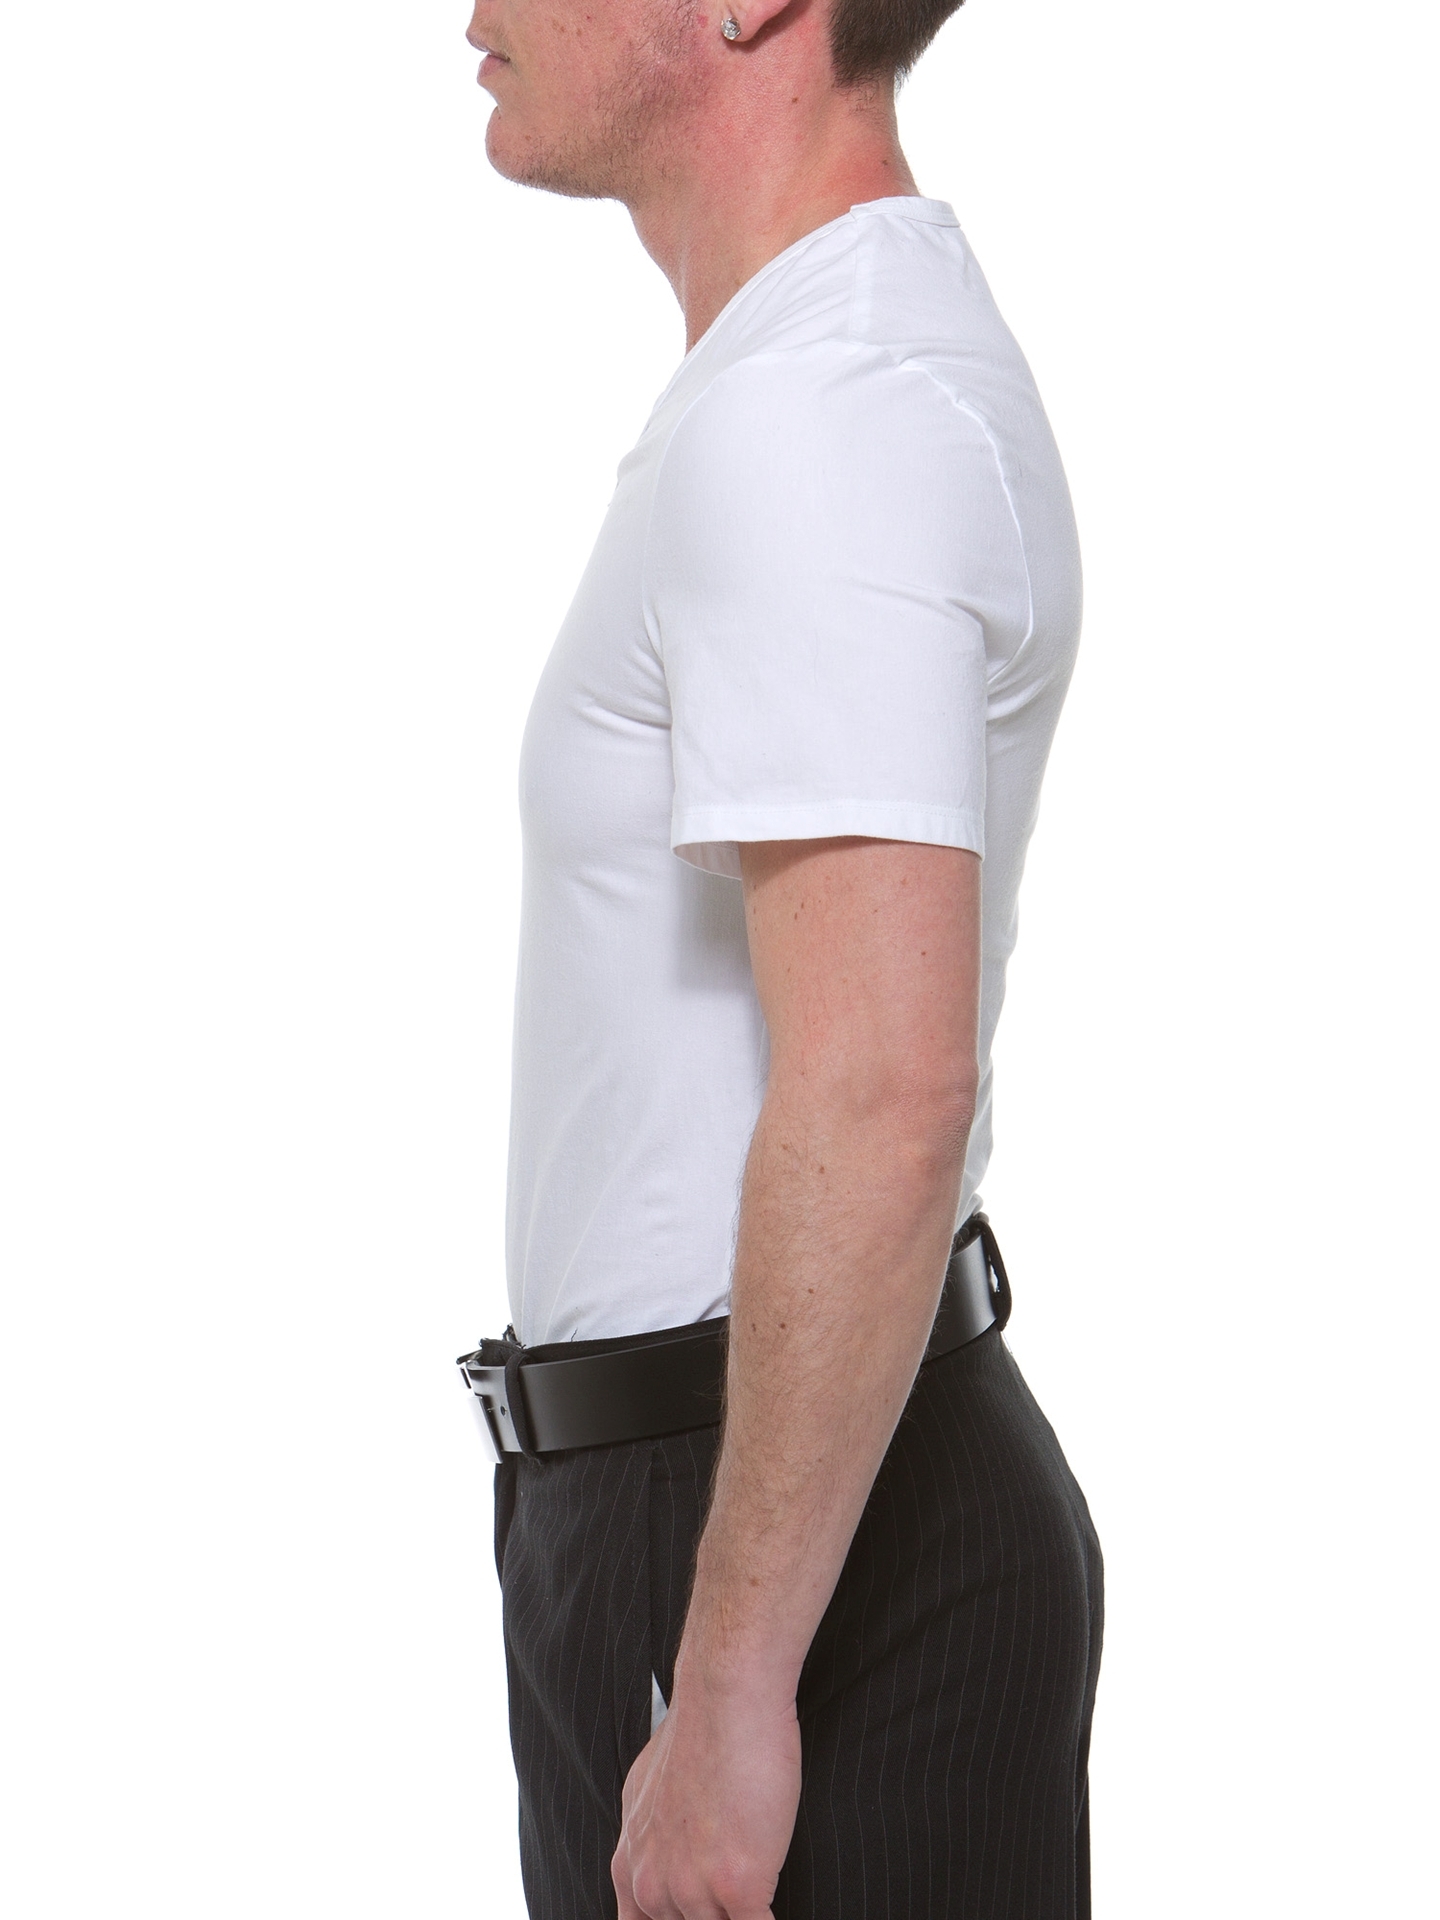 MagiCotton V-Neck Compression Shirt. FTM Chest Binders for Trans Men by  Underworks